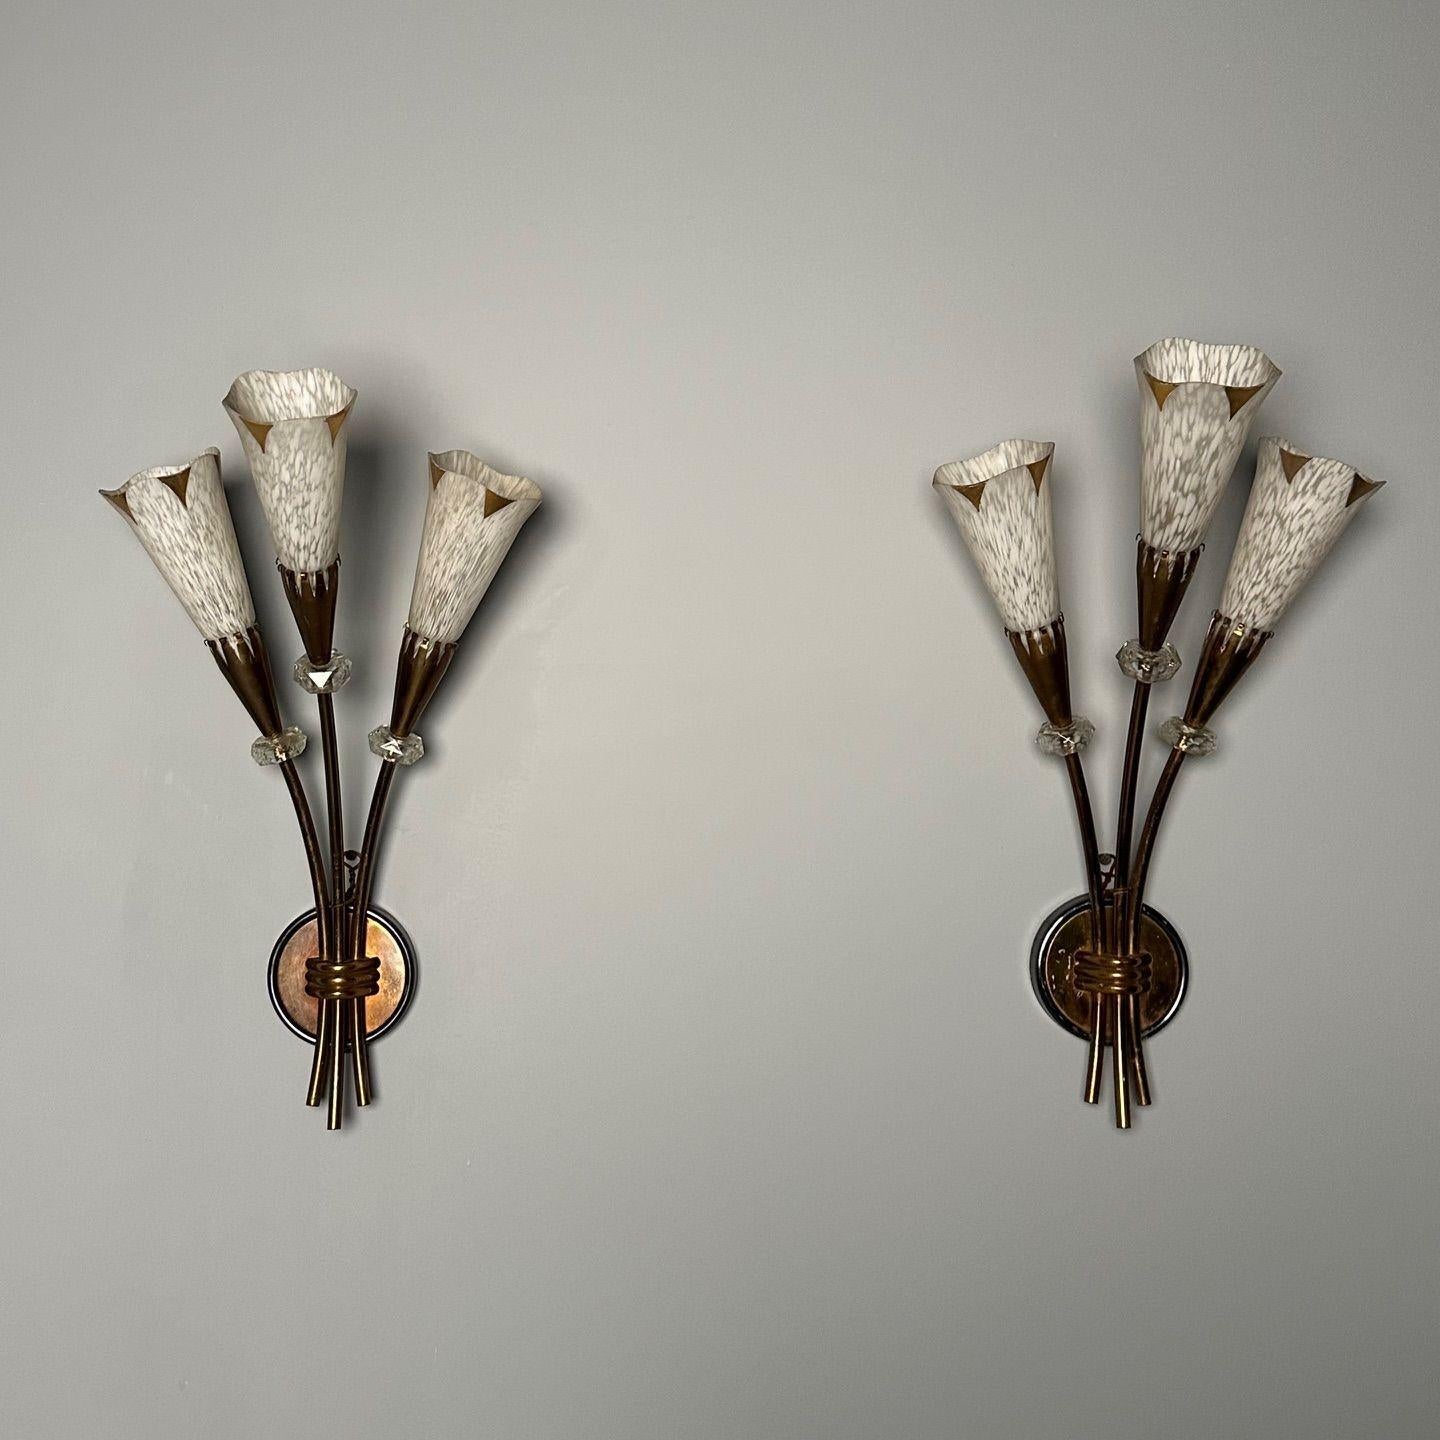 French Mid-Century Modern, Three Arm Sconces, Brass, Crystal, France, 1950s In Good Condition For Sale In Stamford, CT